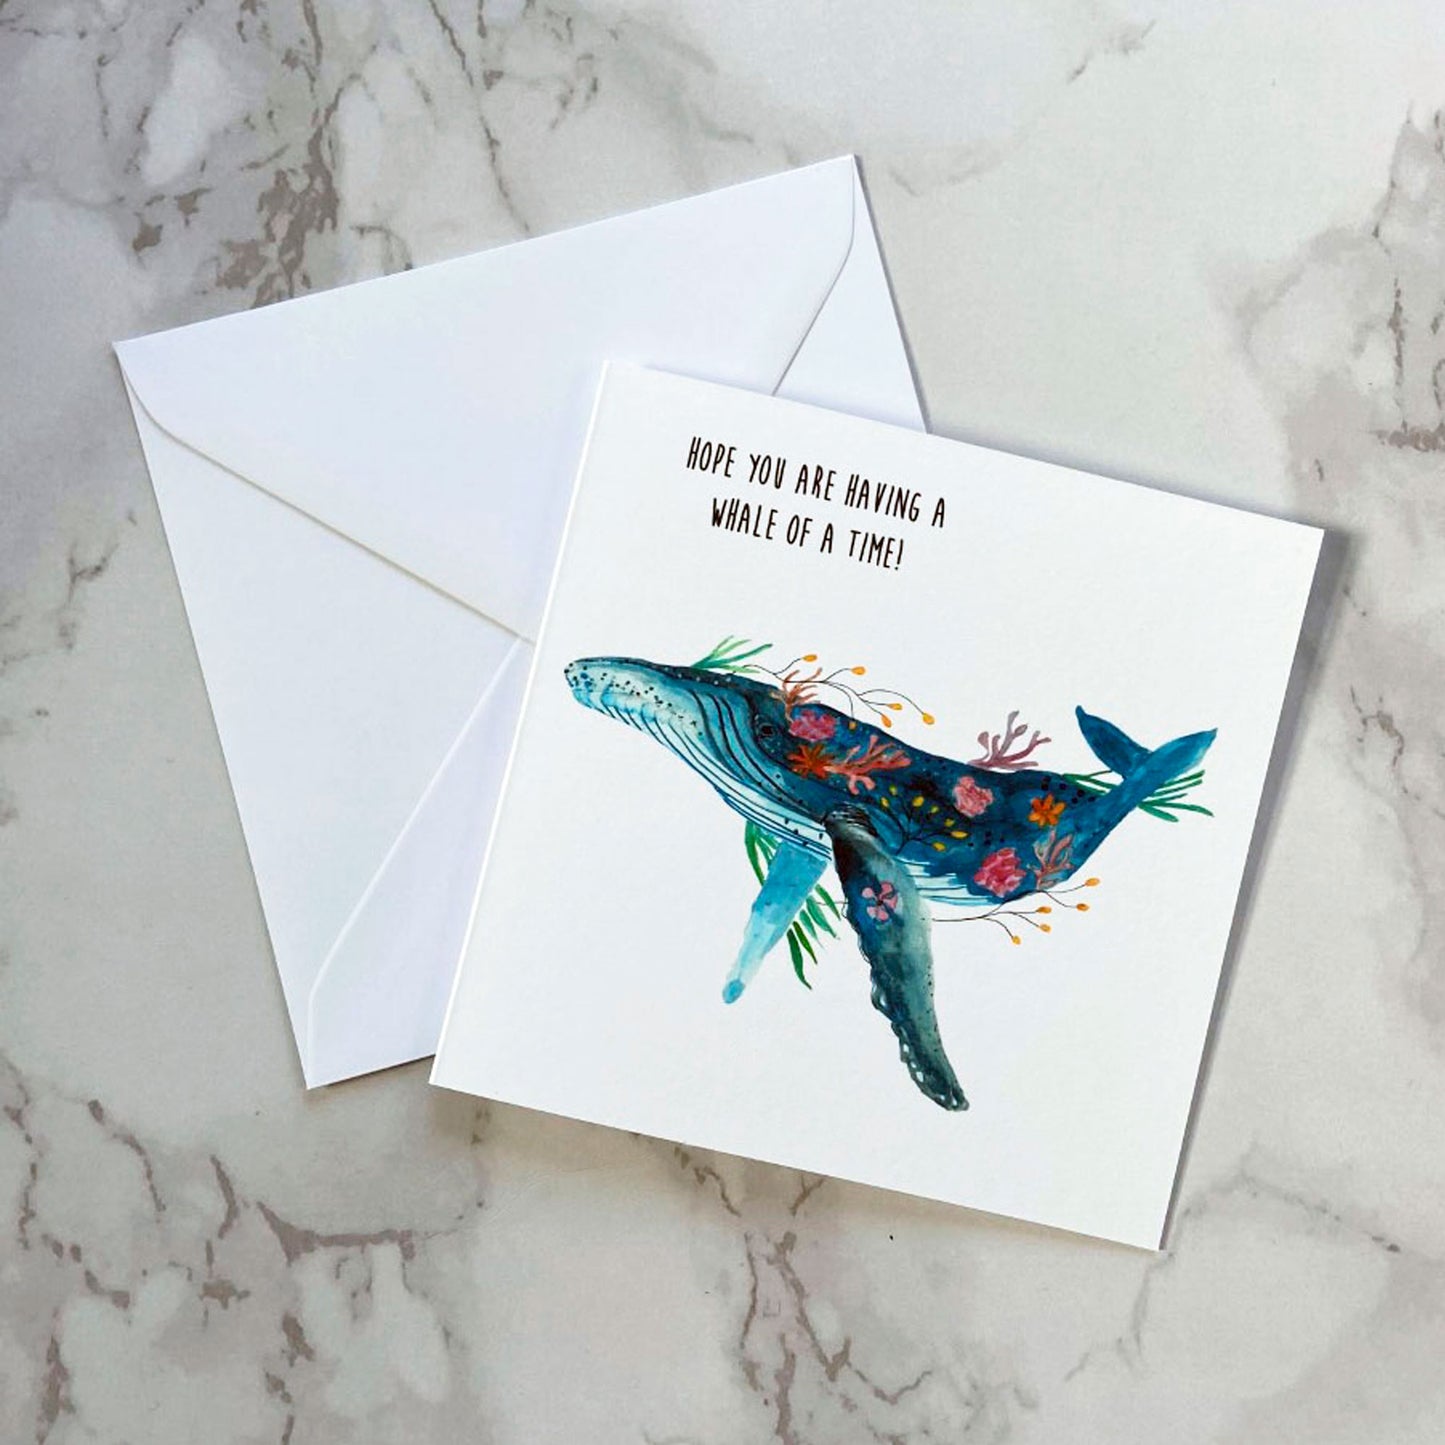 Having a Whale of a Time Card